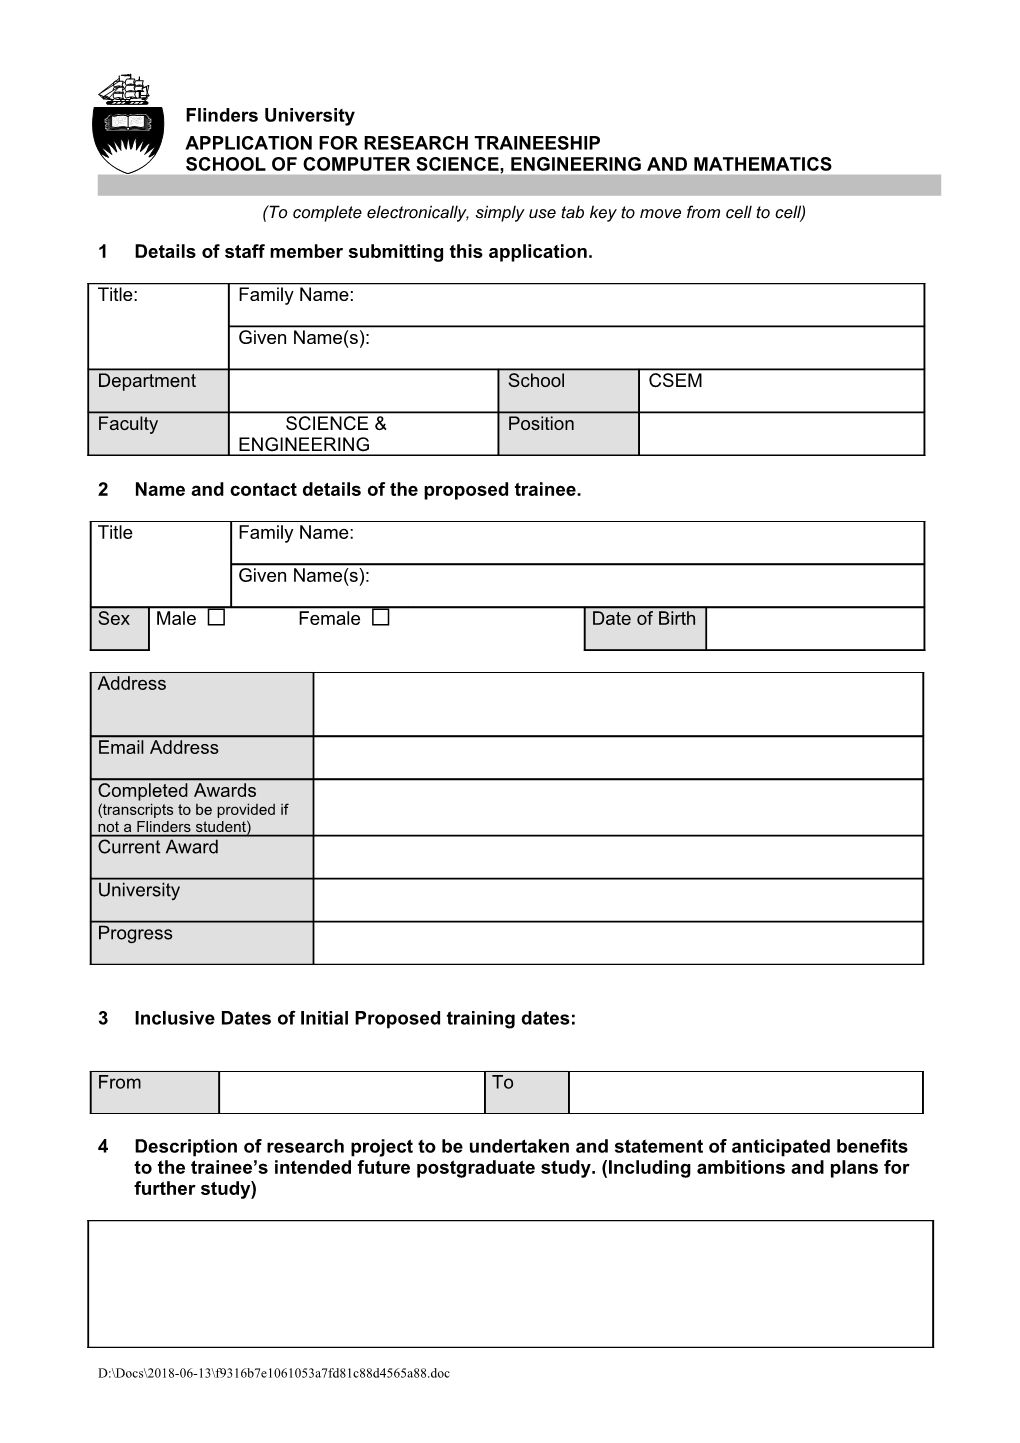 1 Details of Staff Member Submitting This Application